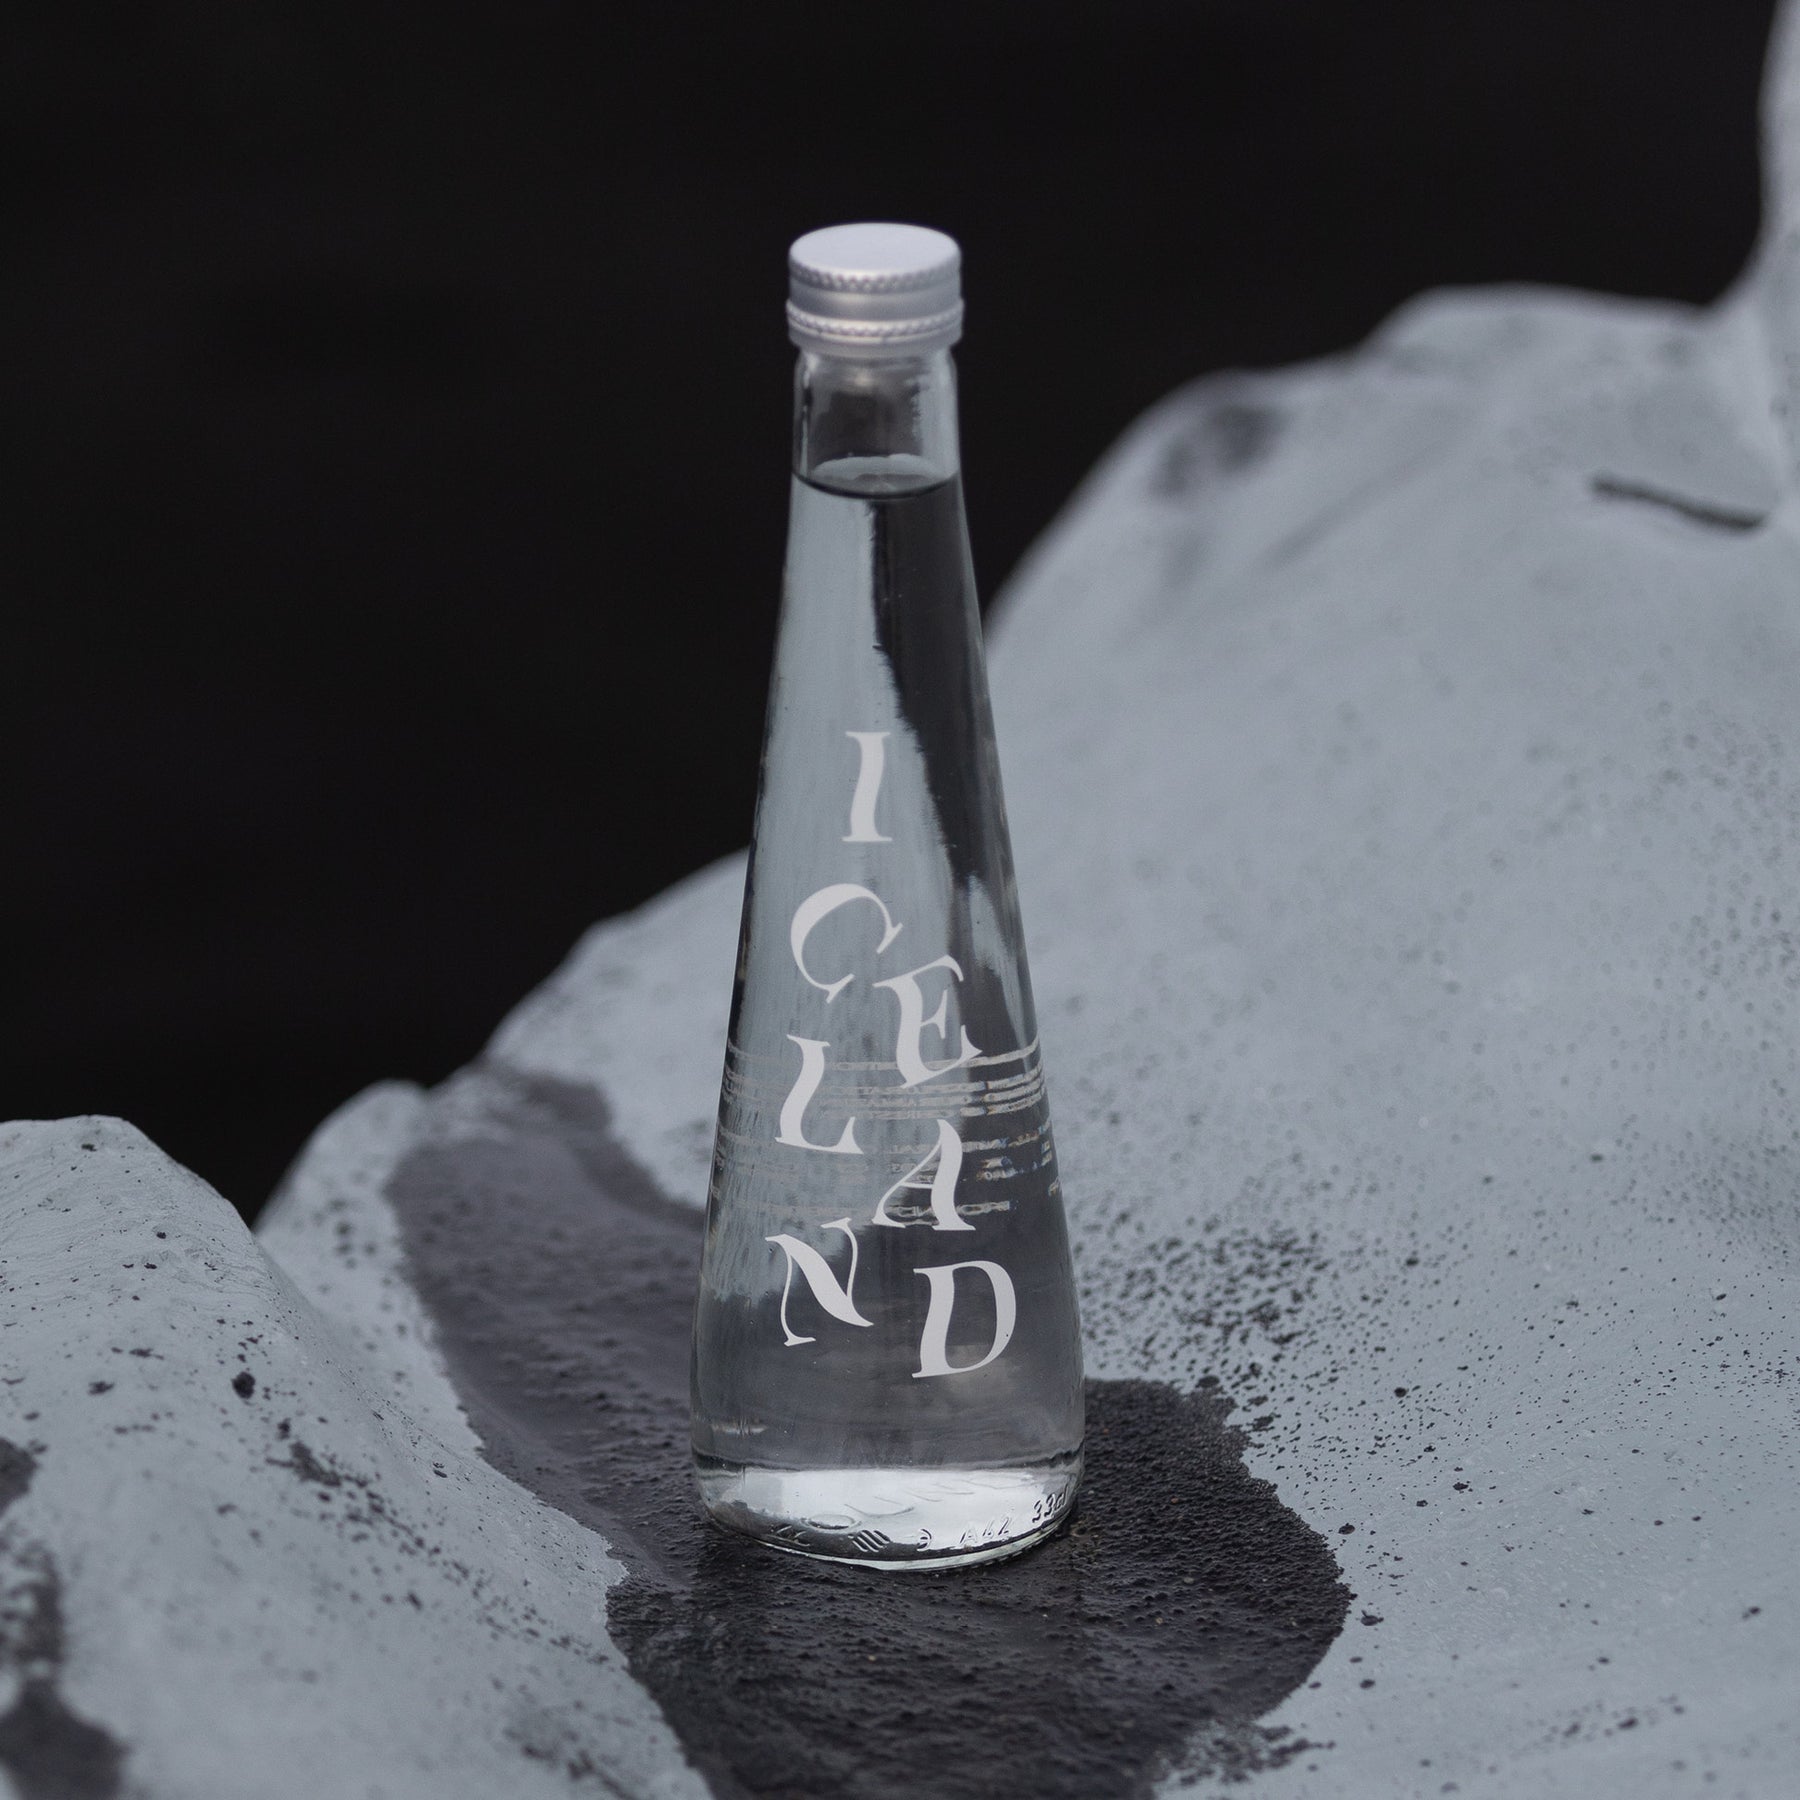 "Iceland" Natural Mineral Water